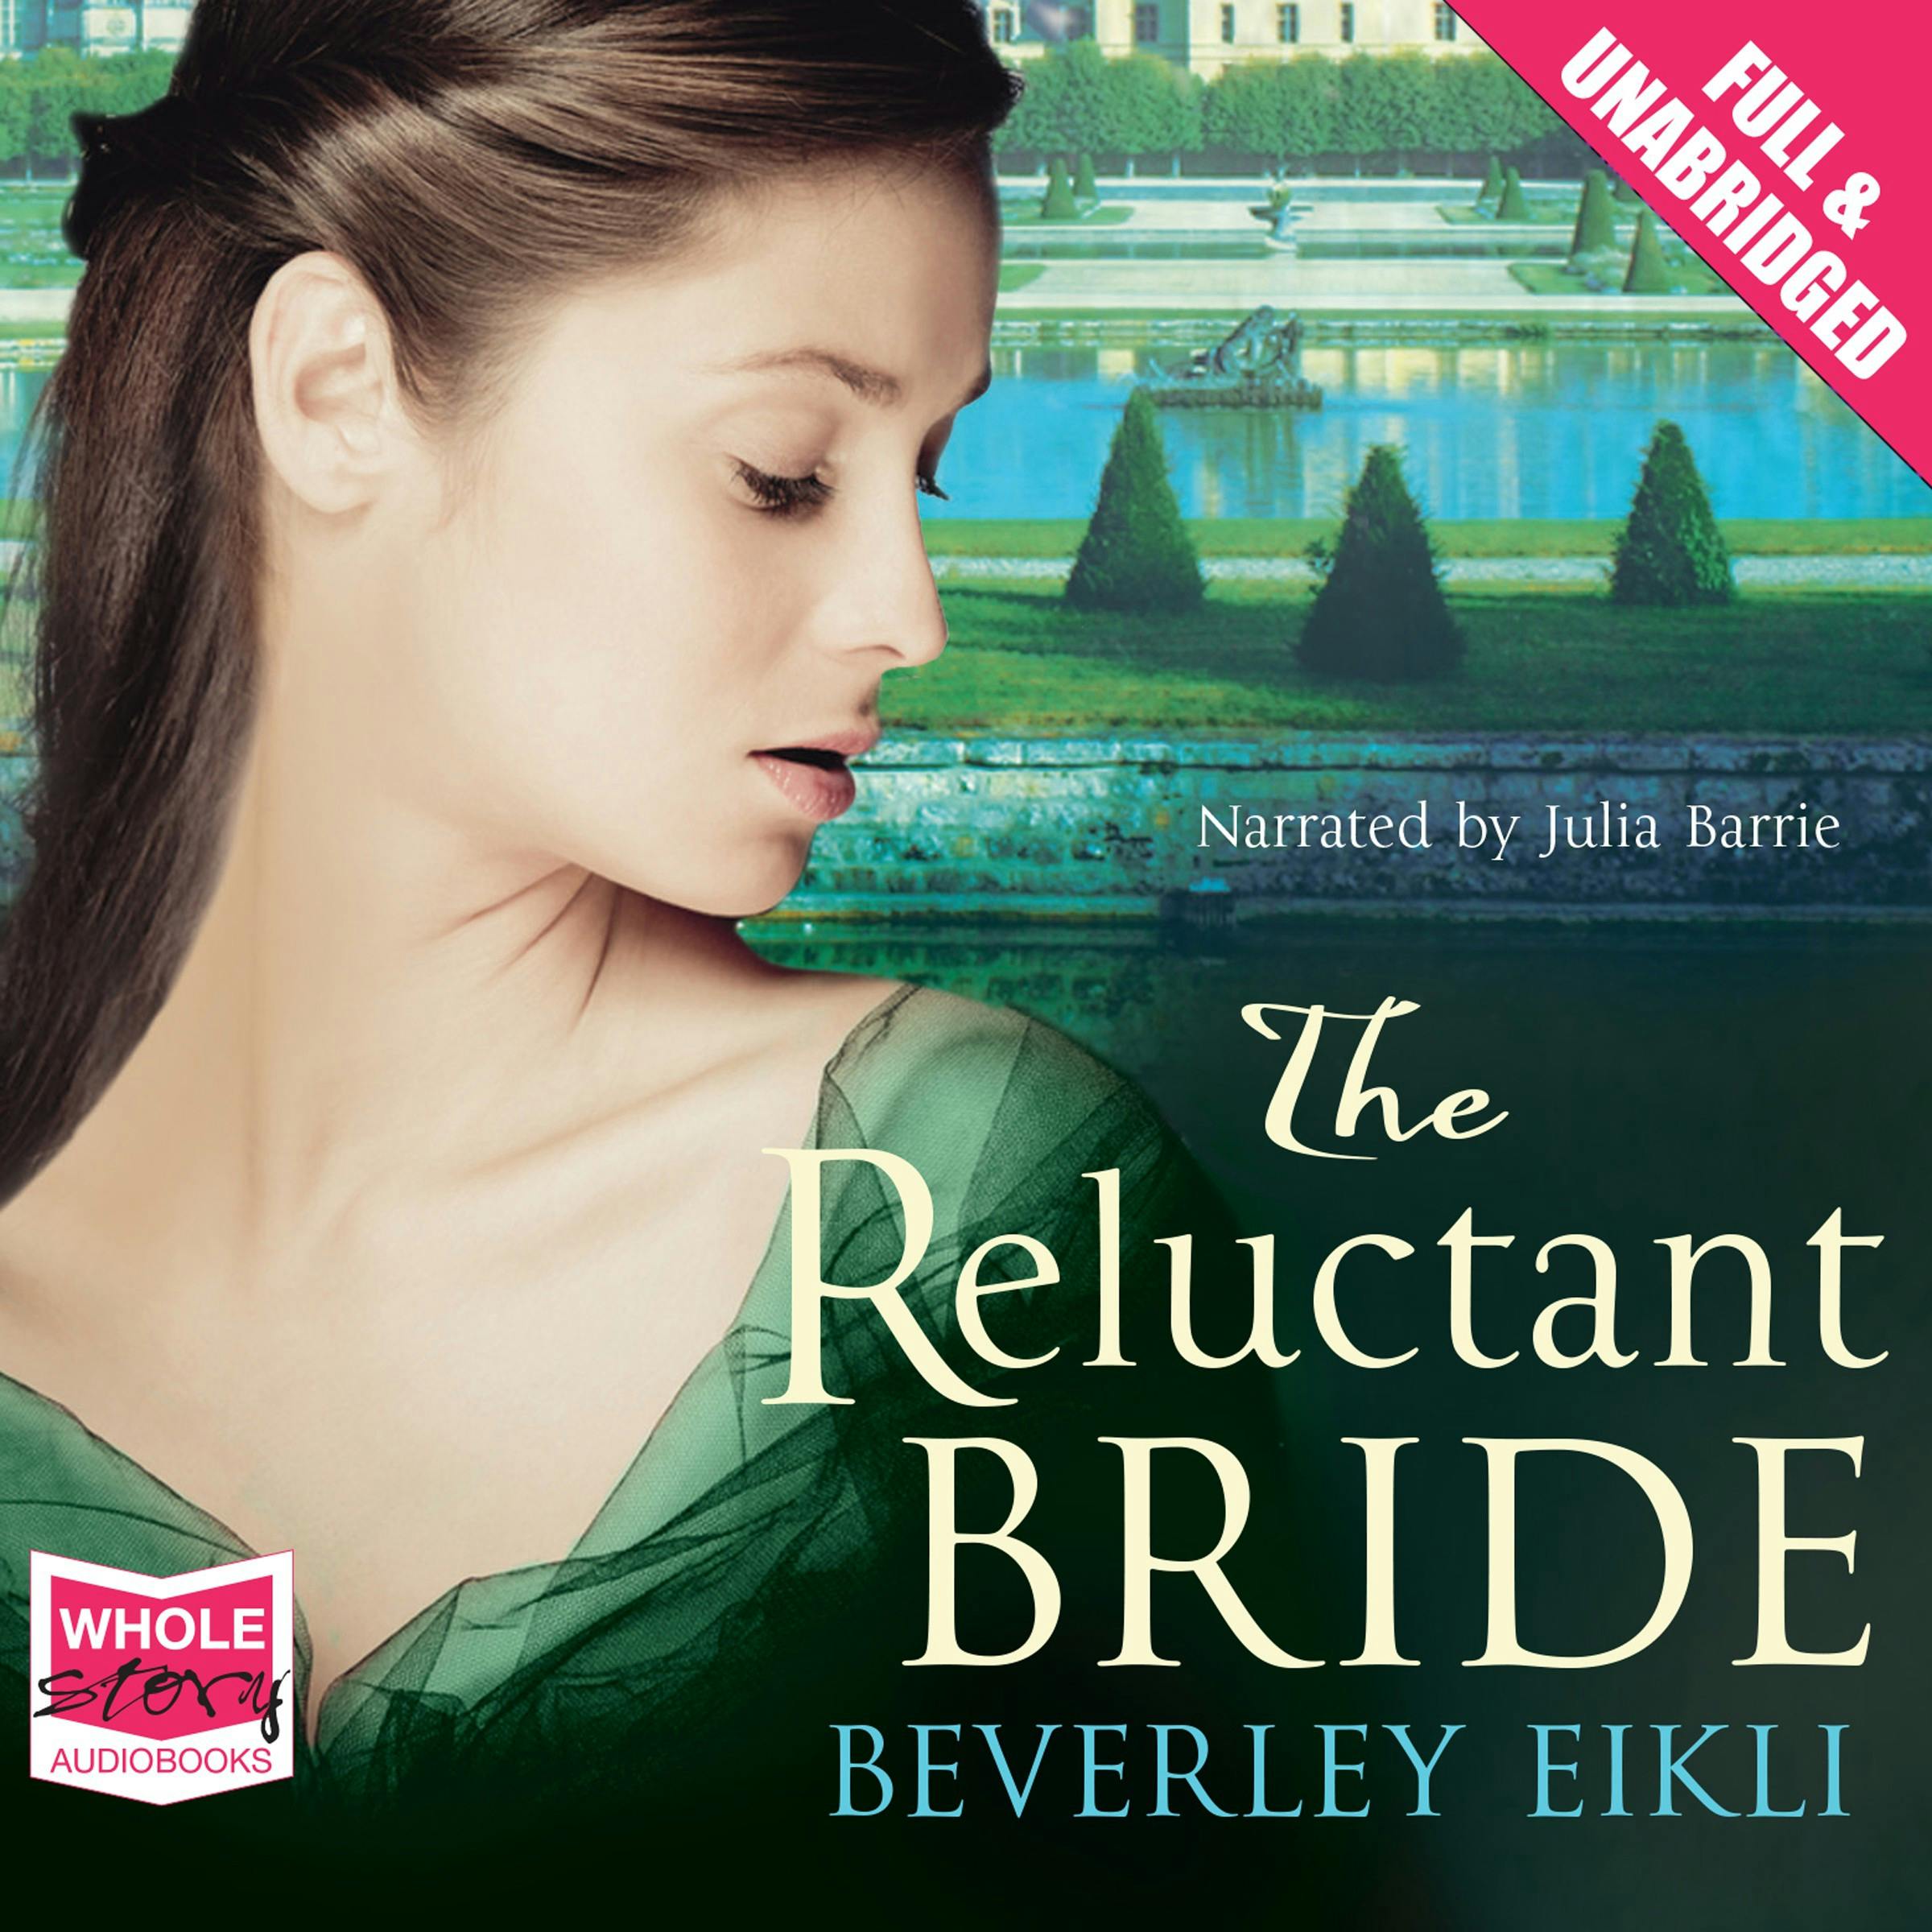 The Reluctant Bride - Beverley Eikli